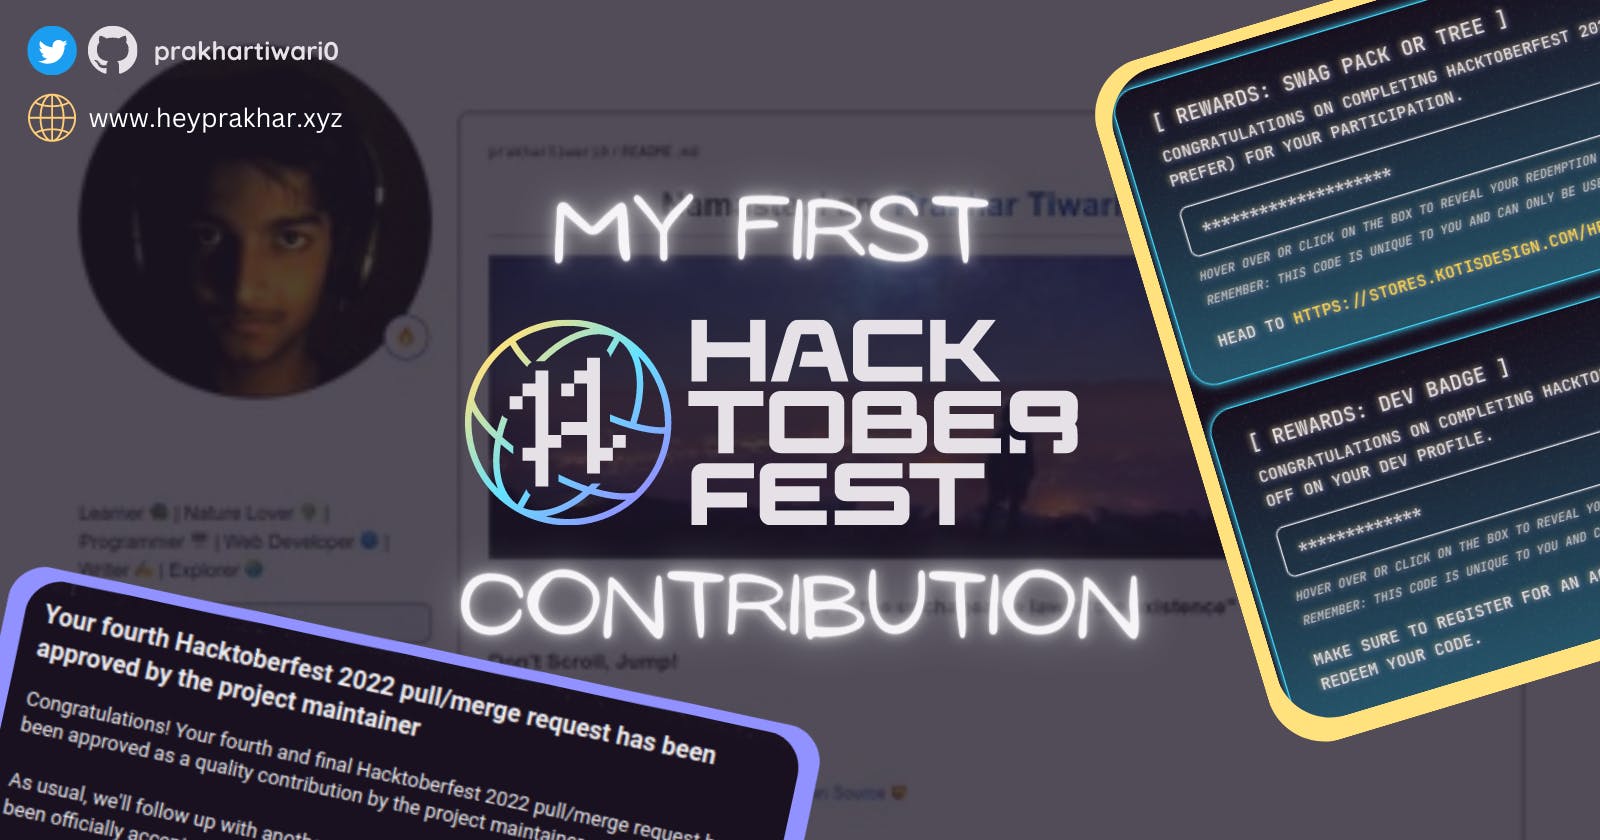 Sharing my little journey of HacktoberFest with you!